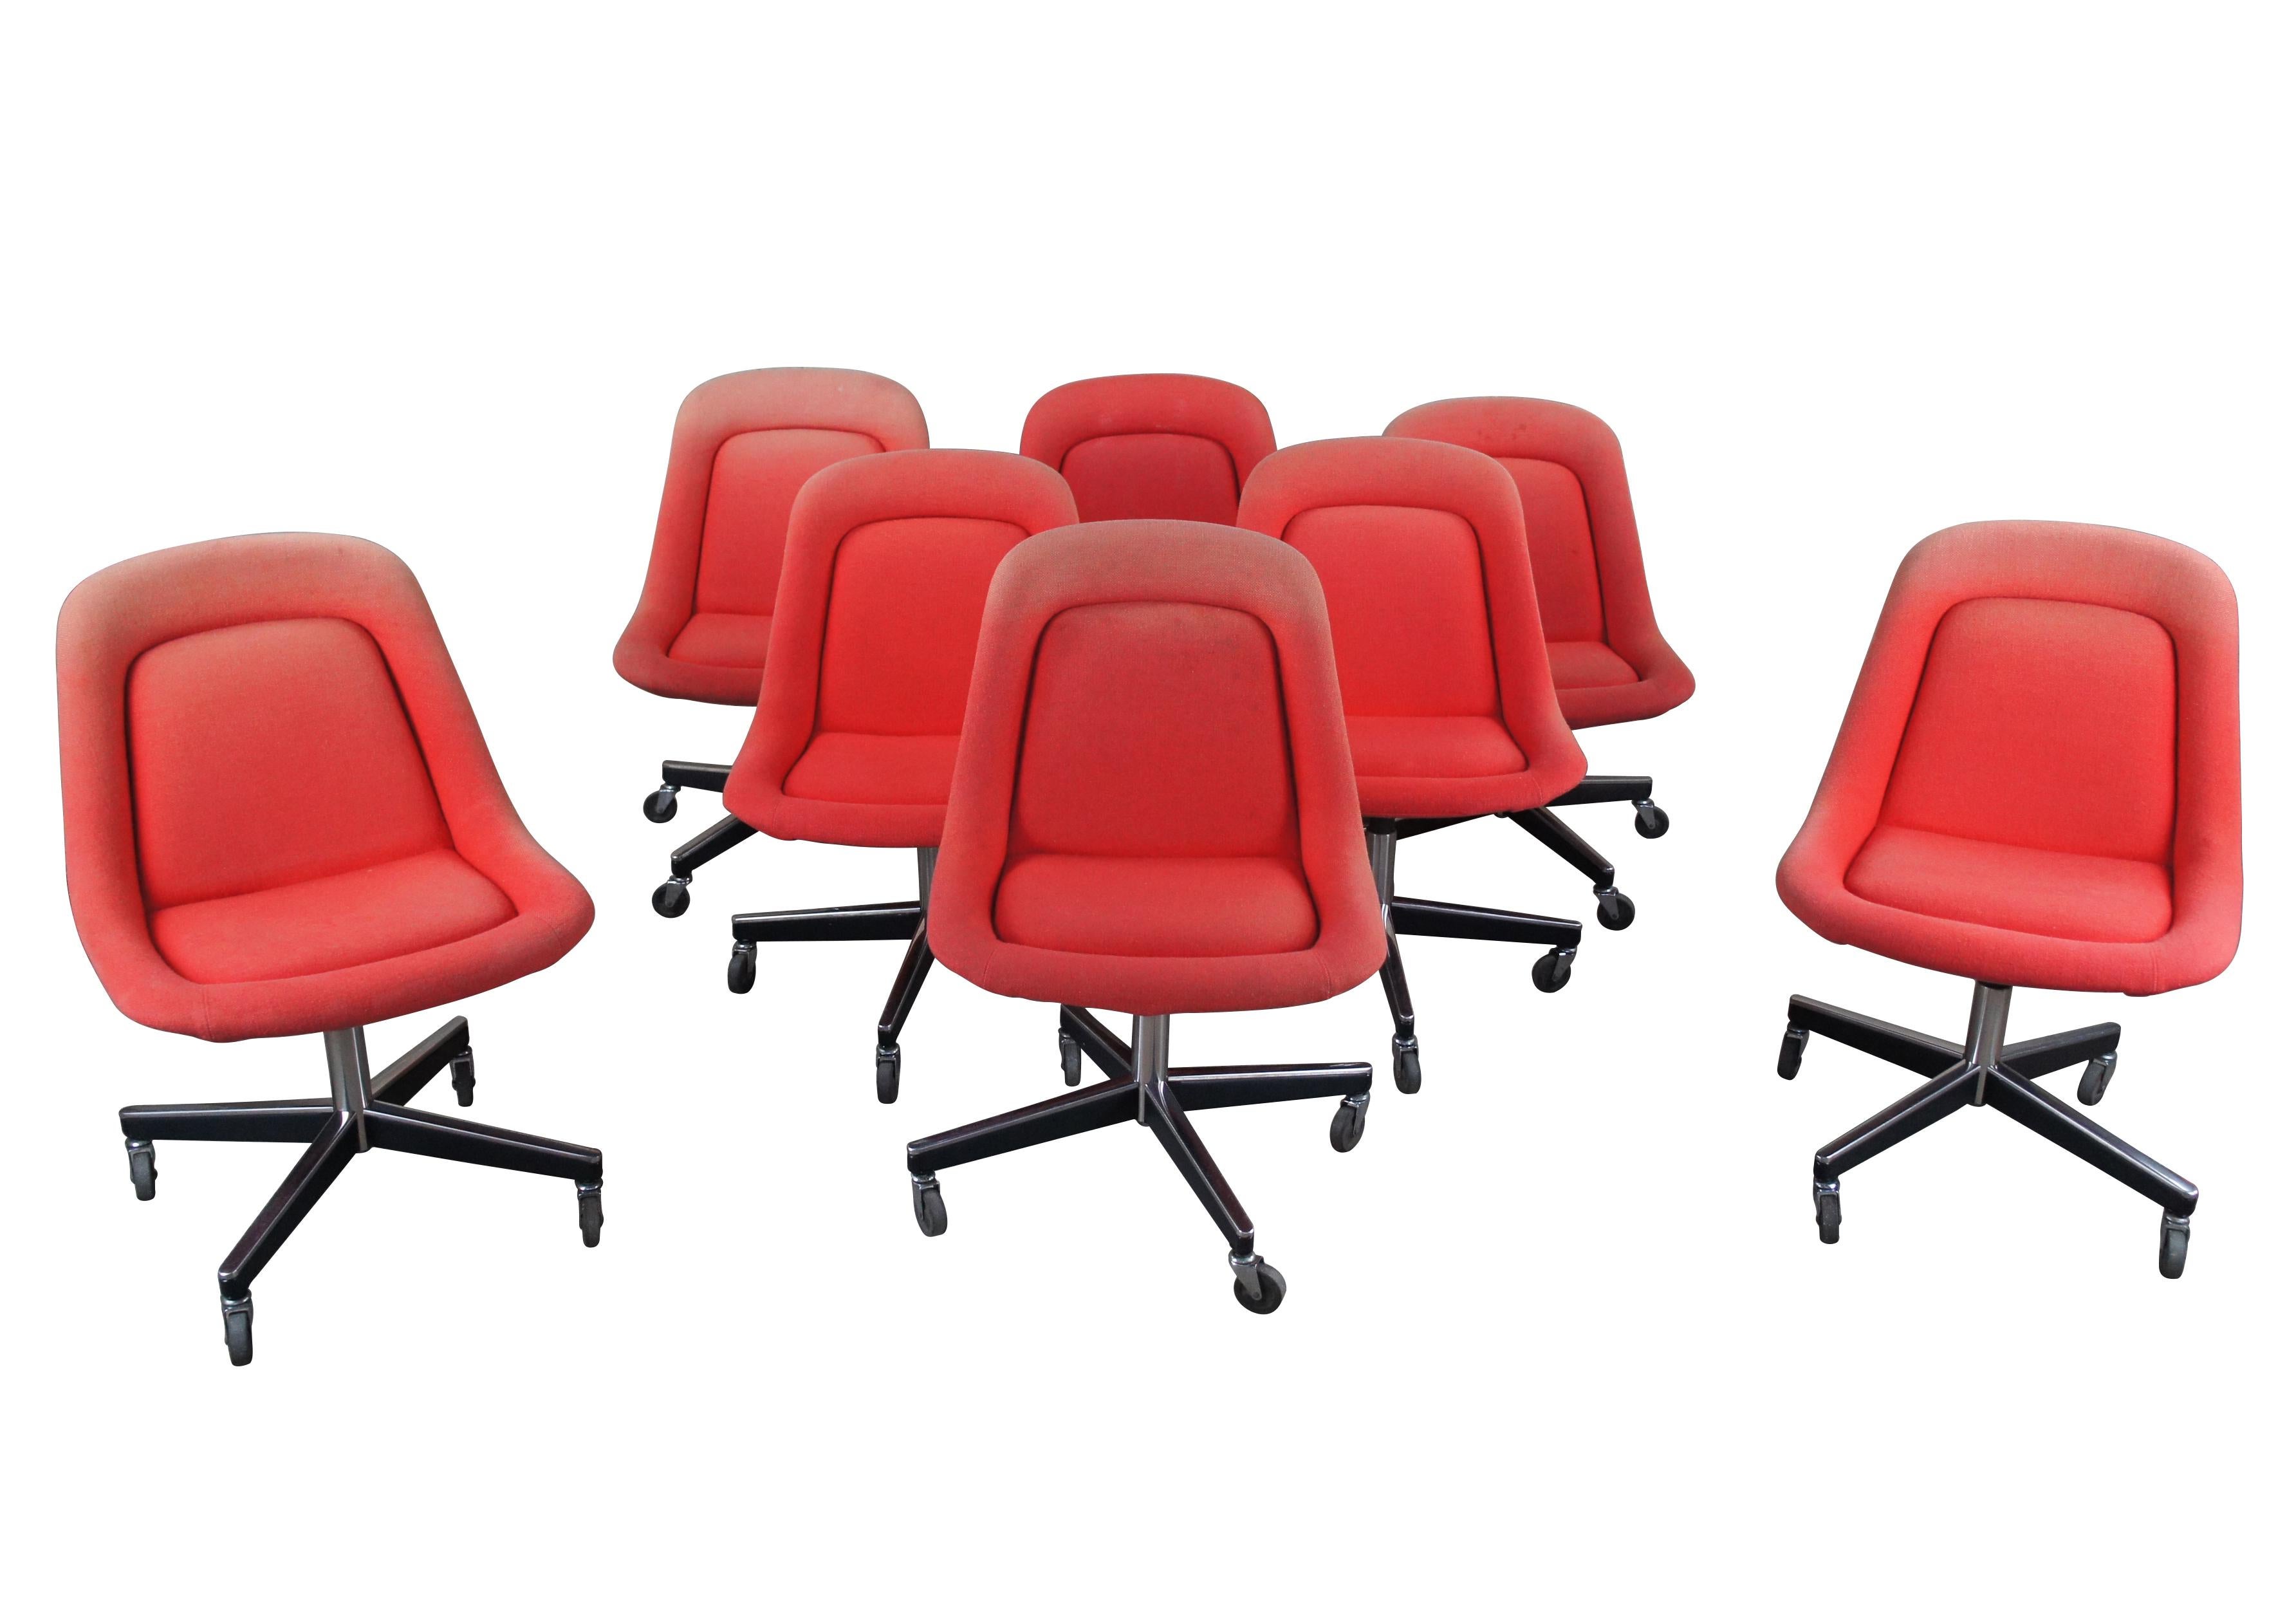 8 Max Pearson for Knoll International red wool upholstered rolling swivel chairs, circa 1960s. Great for conference table or dining use. Tulip shaped padded seats over steel swivel rolling base. marked along underside.

Introduced in 1966, the